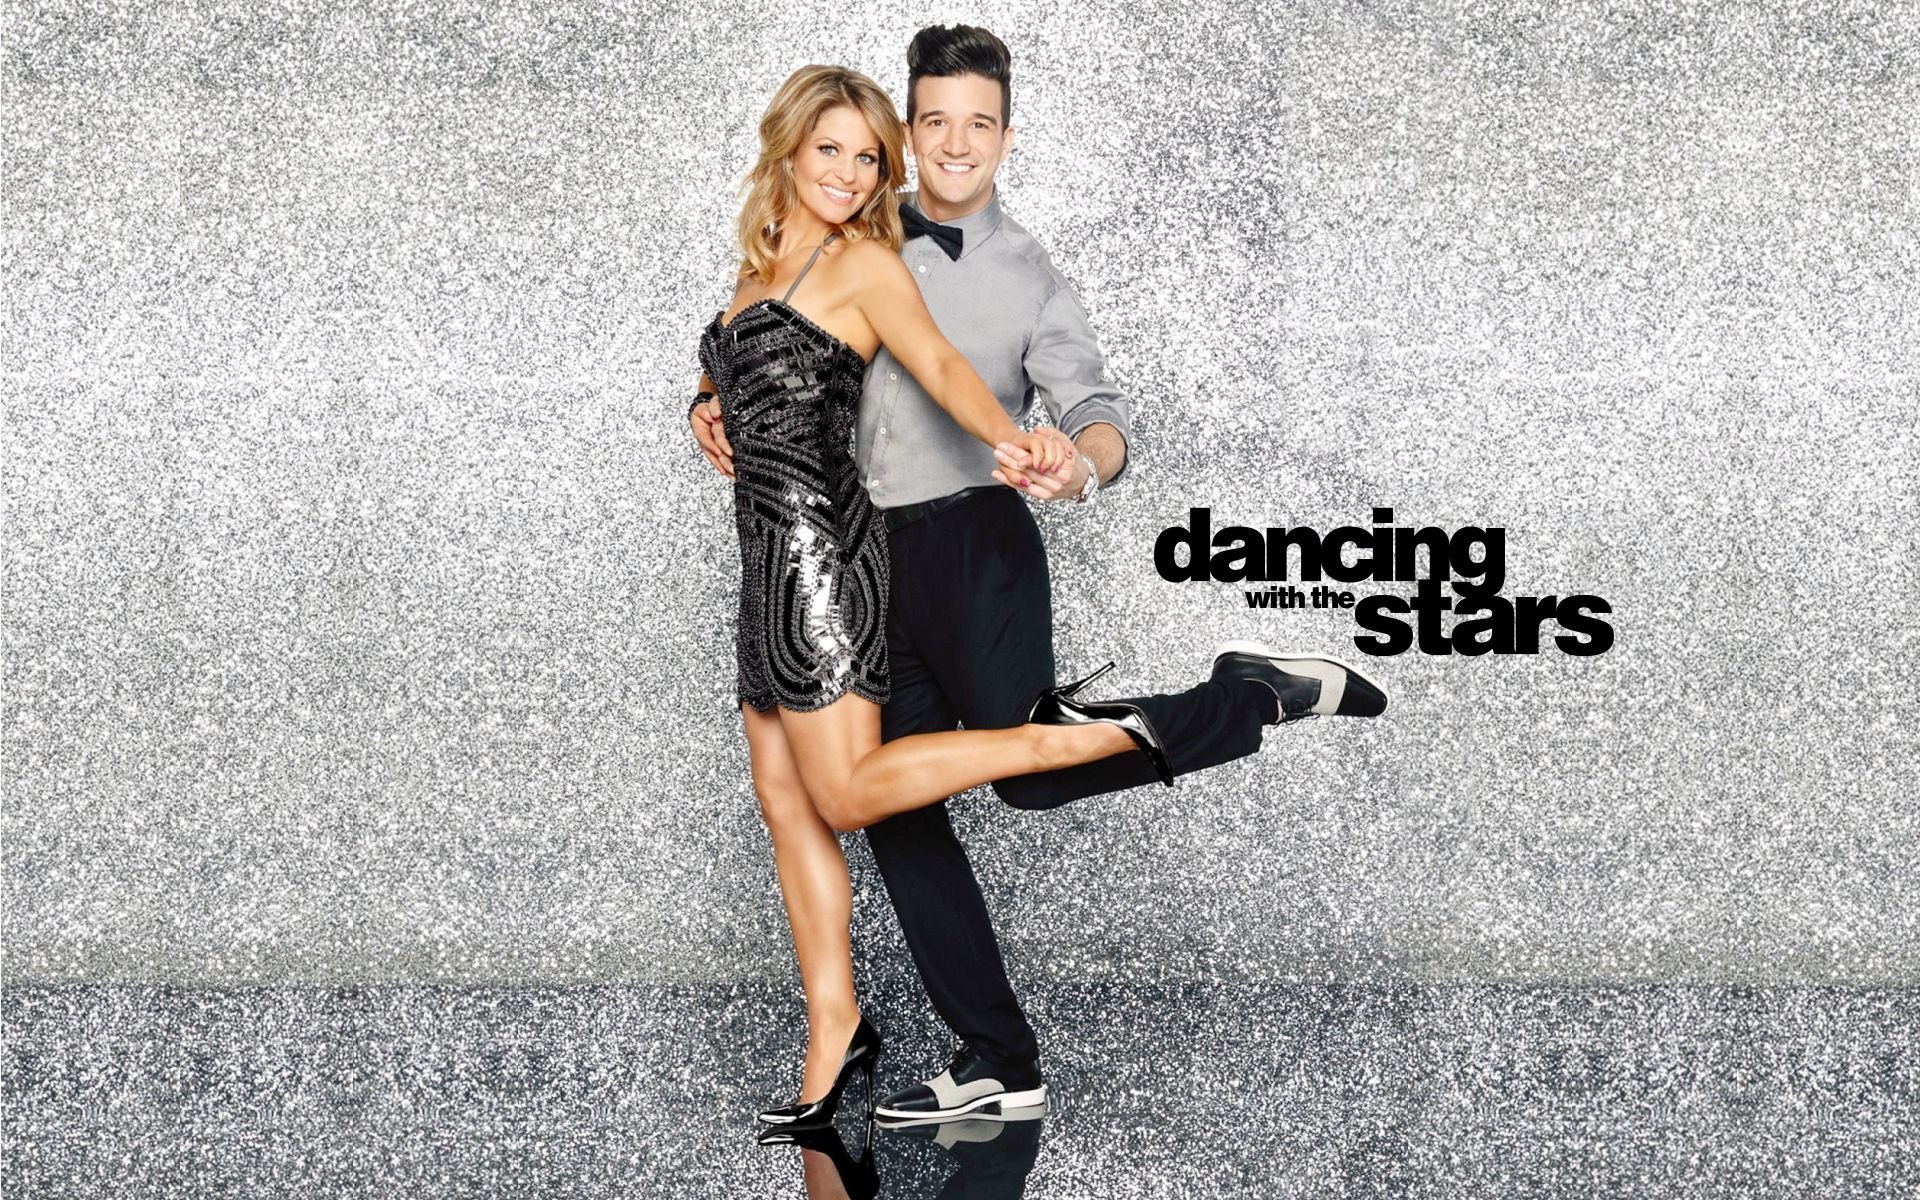 dancing with the stars, Family, Gameshow, Dance, Music, Stars, Dancing, Series, Competition,  55 Wallpaper